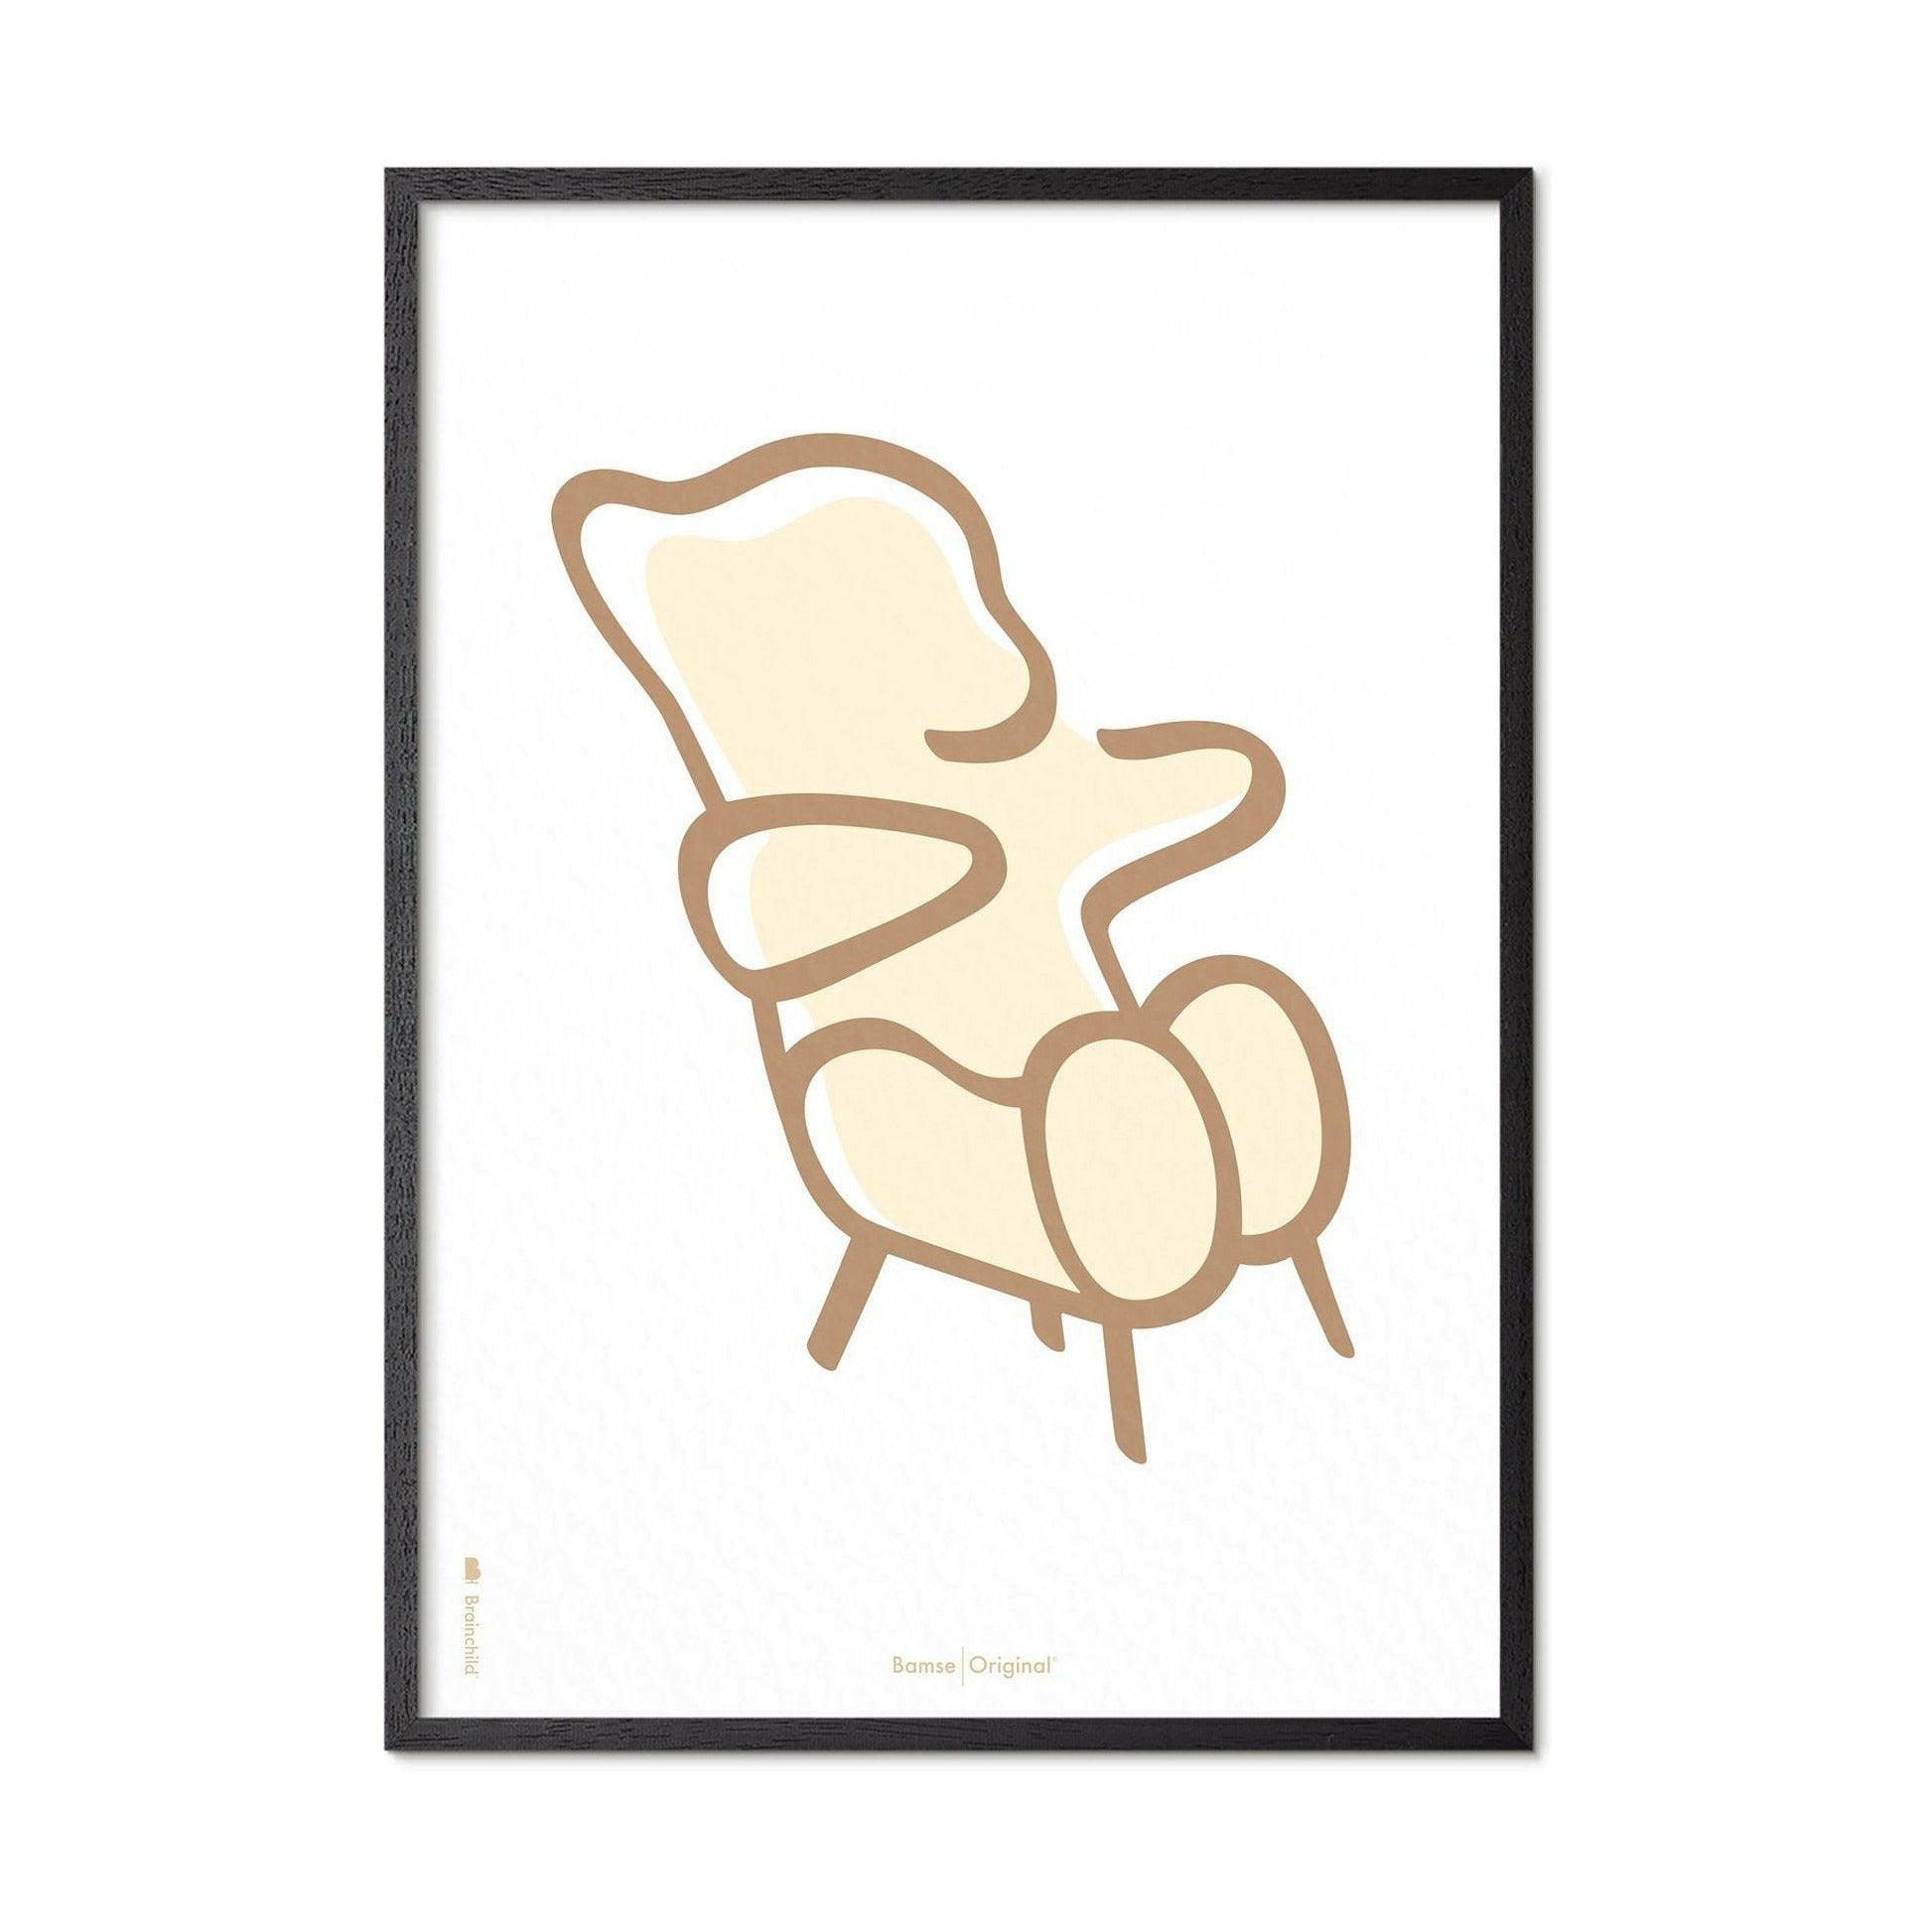 Brainchild Teddy Bear Line Poster, Frame In Black Lacquered Wood A5, White Background